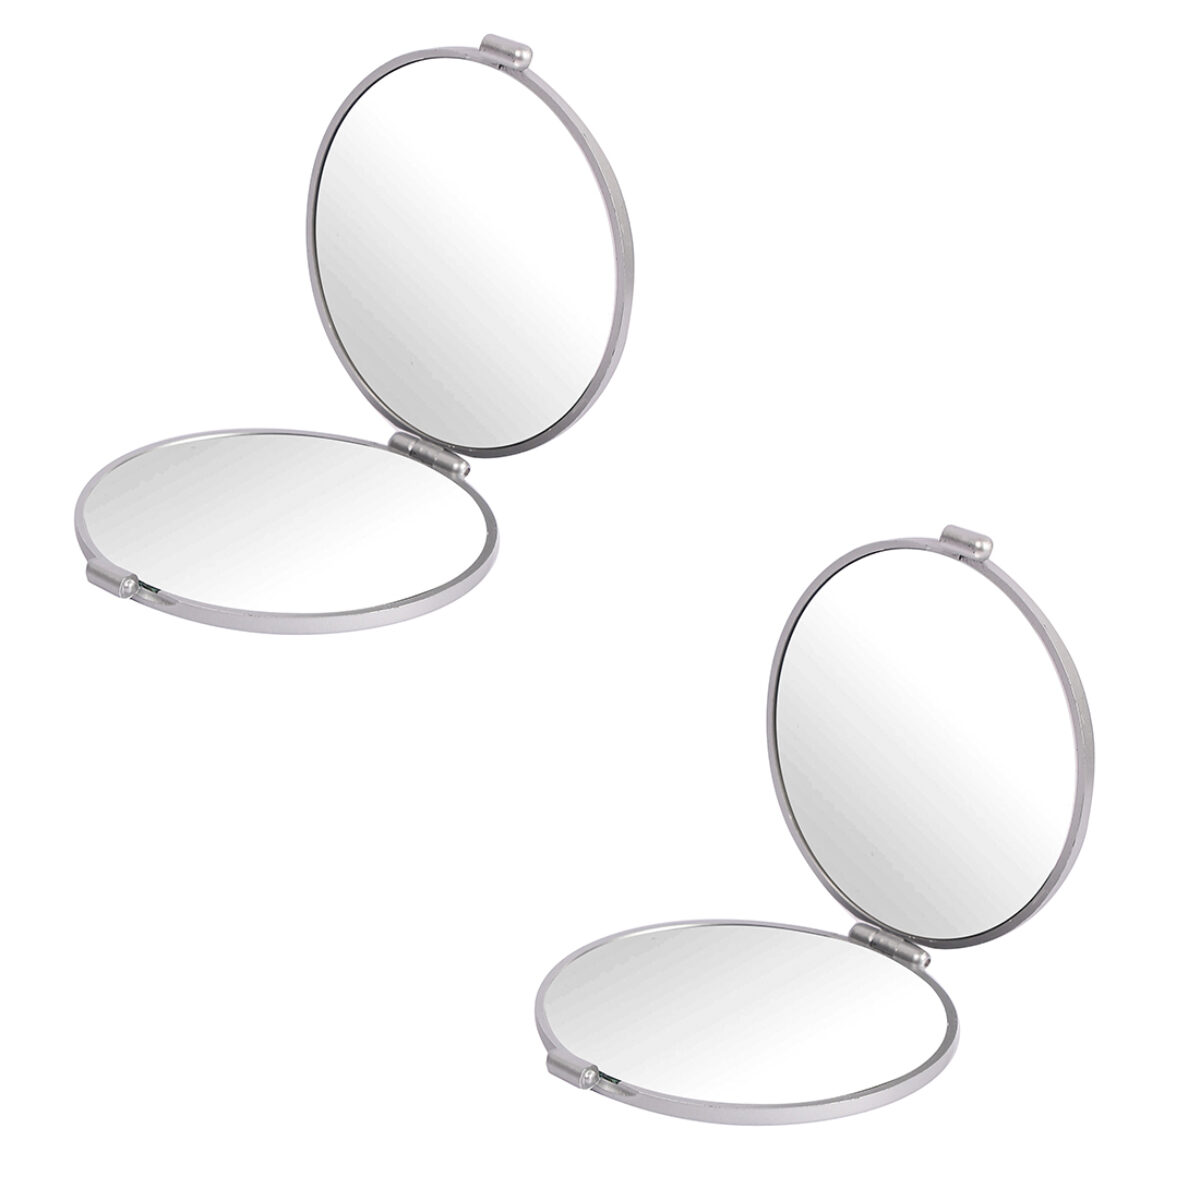 Buy Pelo Folding Mirrors For Purse, Mirror For Makeup, Makeup Mirrors,  Grey, Pack Of 1 Online at Lowest Price Ever in India | Check Reviews &  Ratings - Shop The World